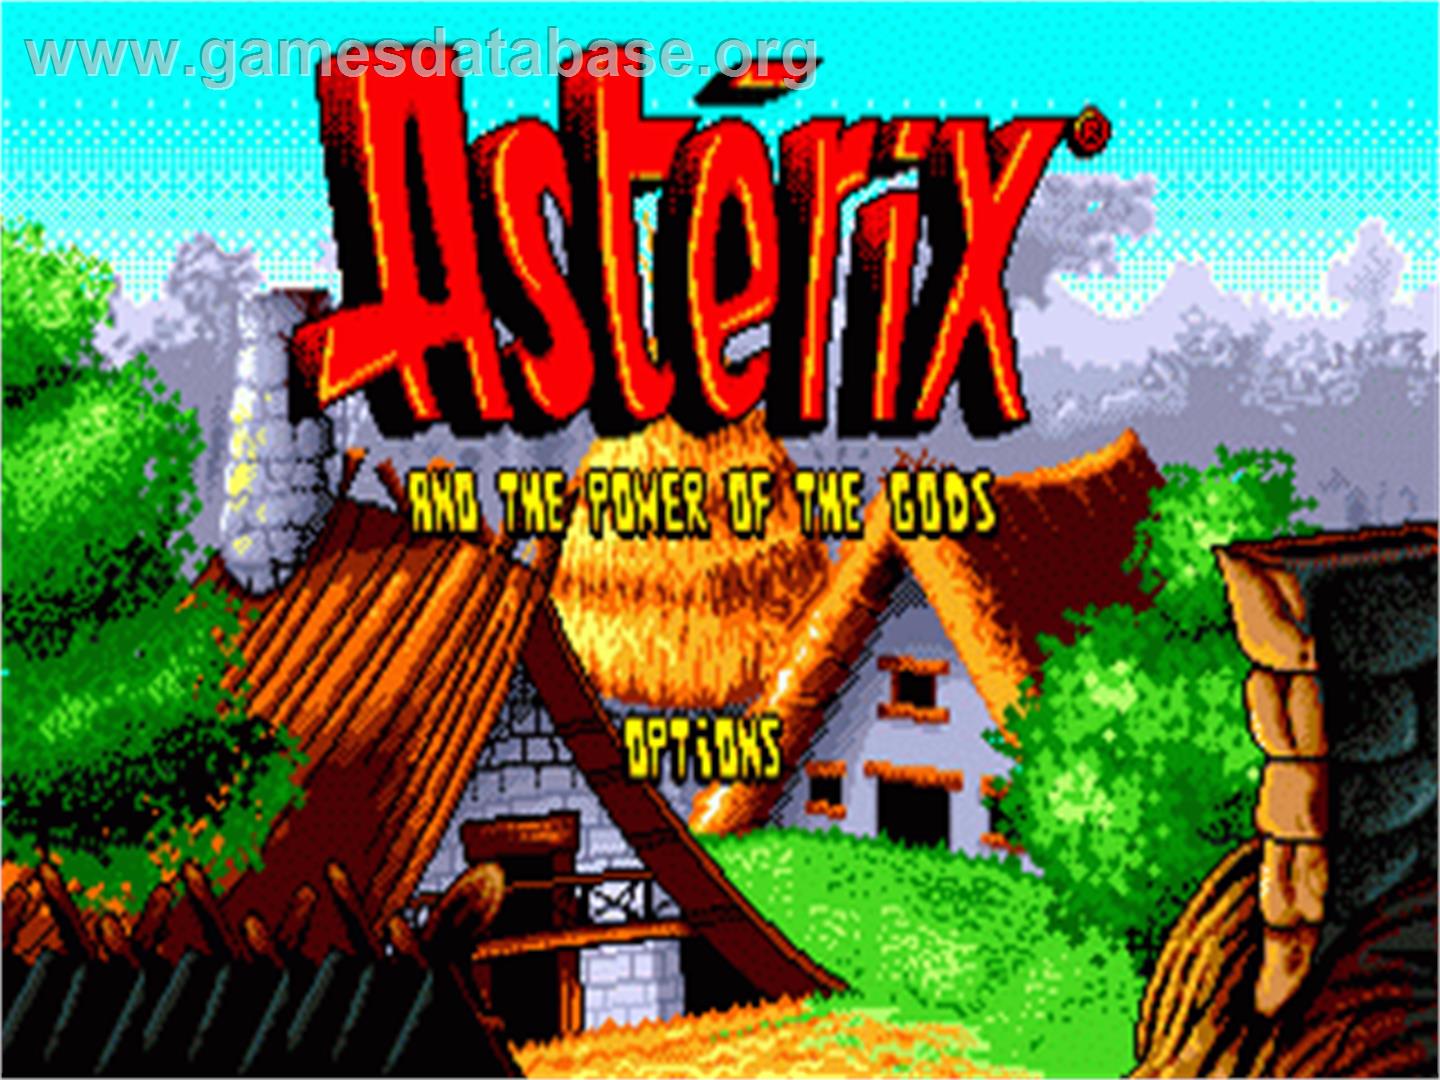 Asterix and the Power of the Gods - Sega Genesis - Artwork - Title Screen